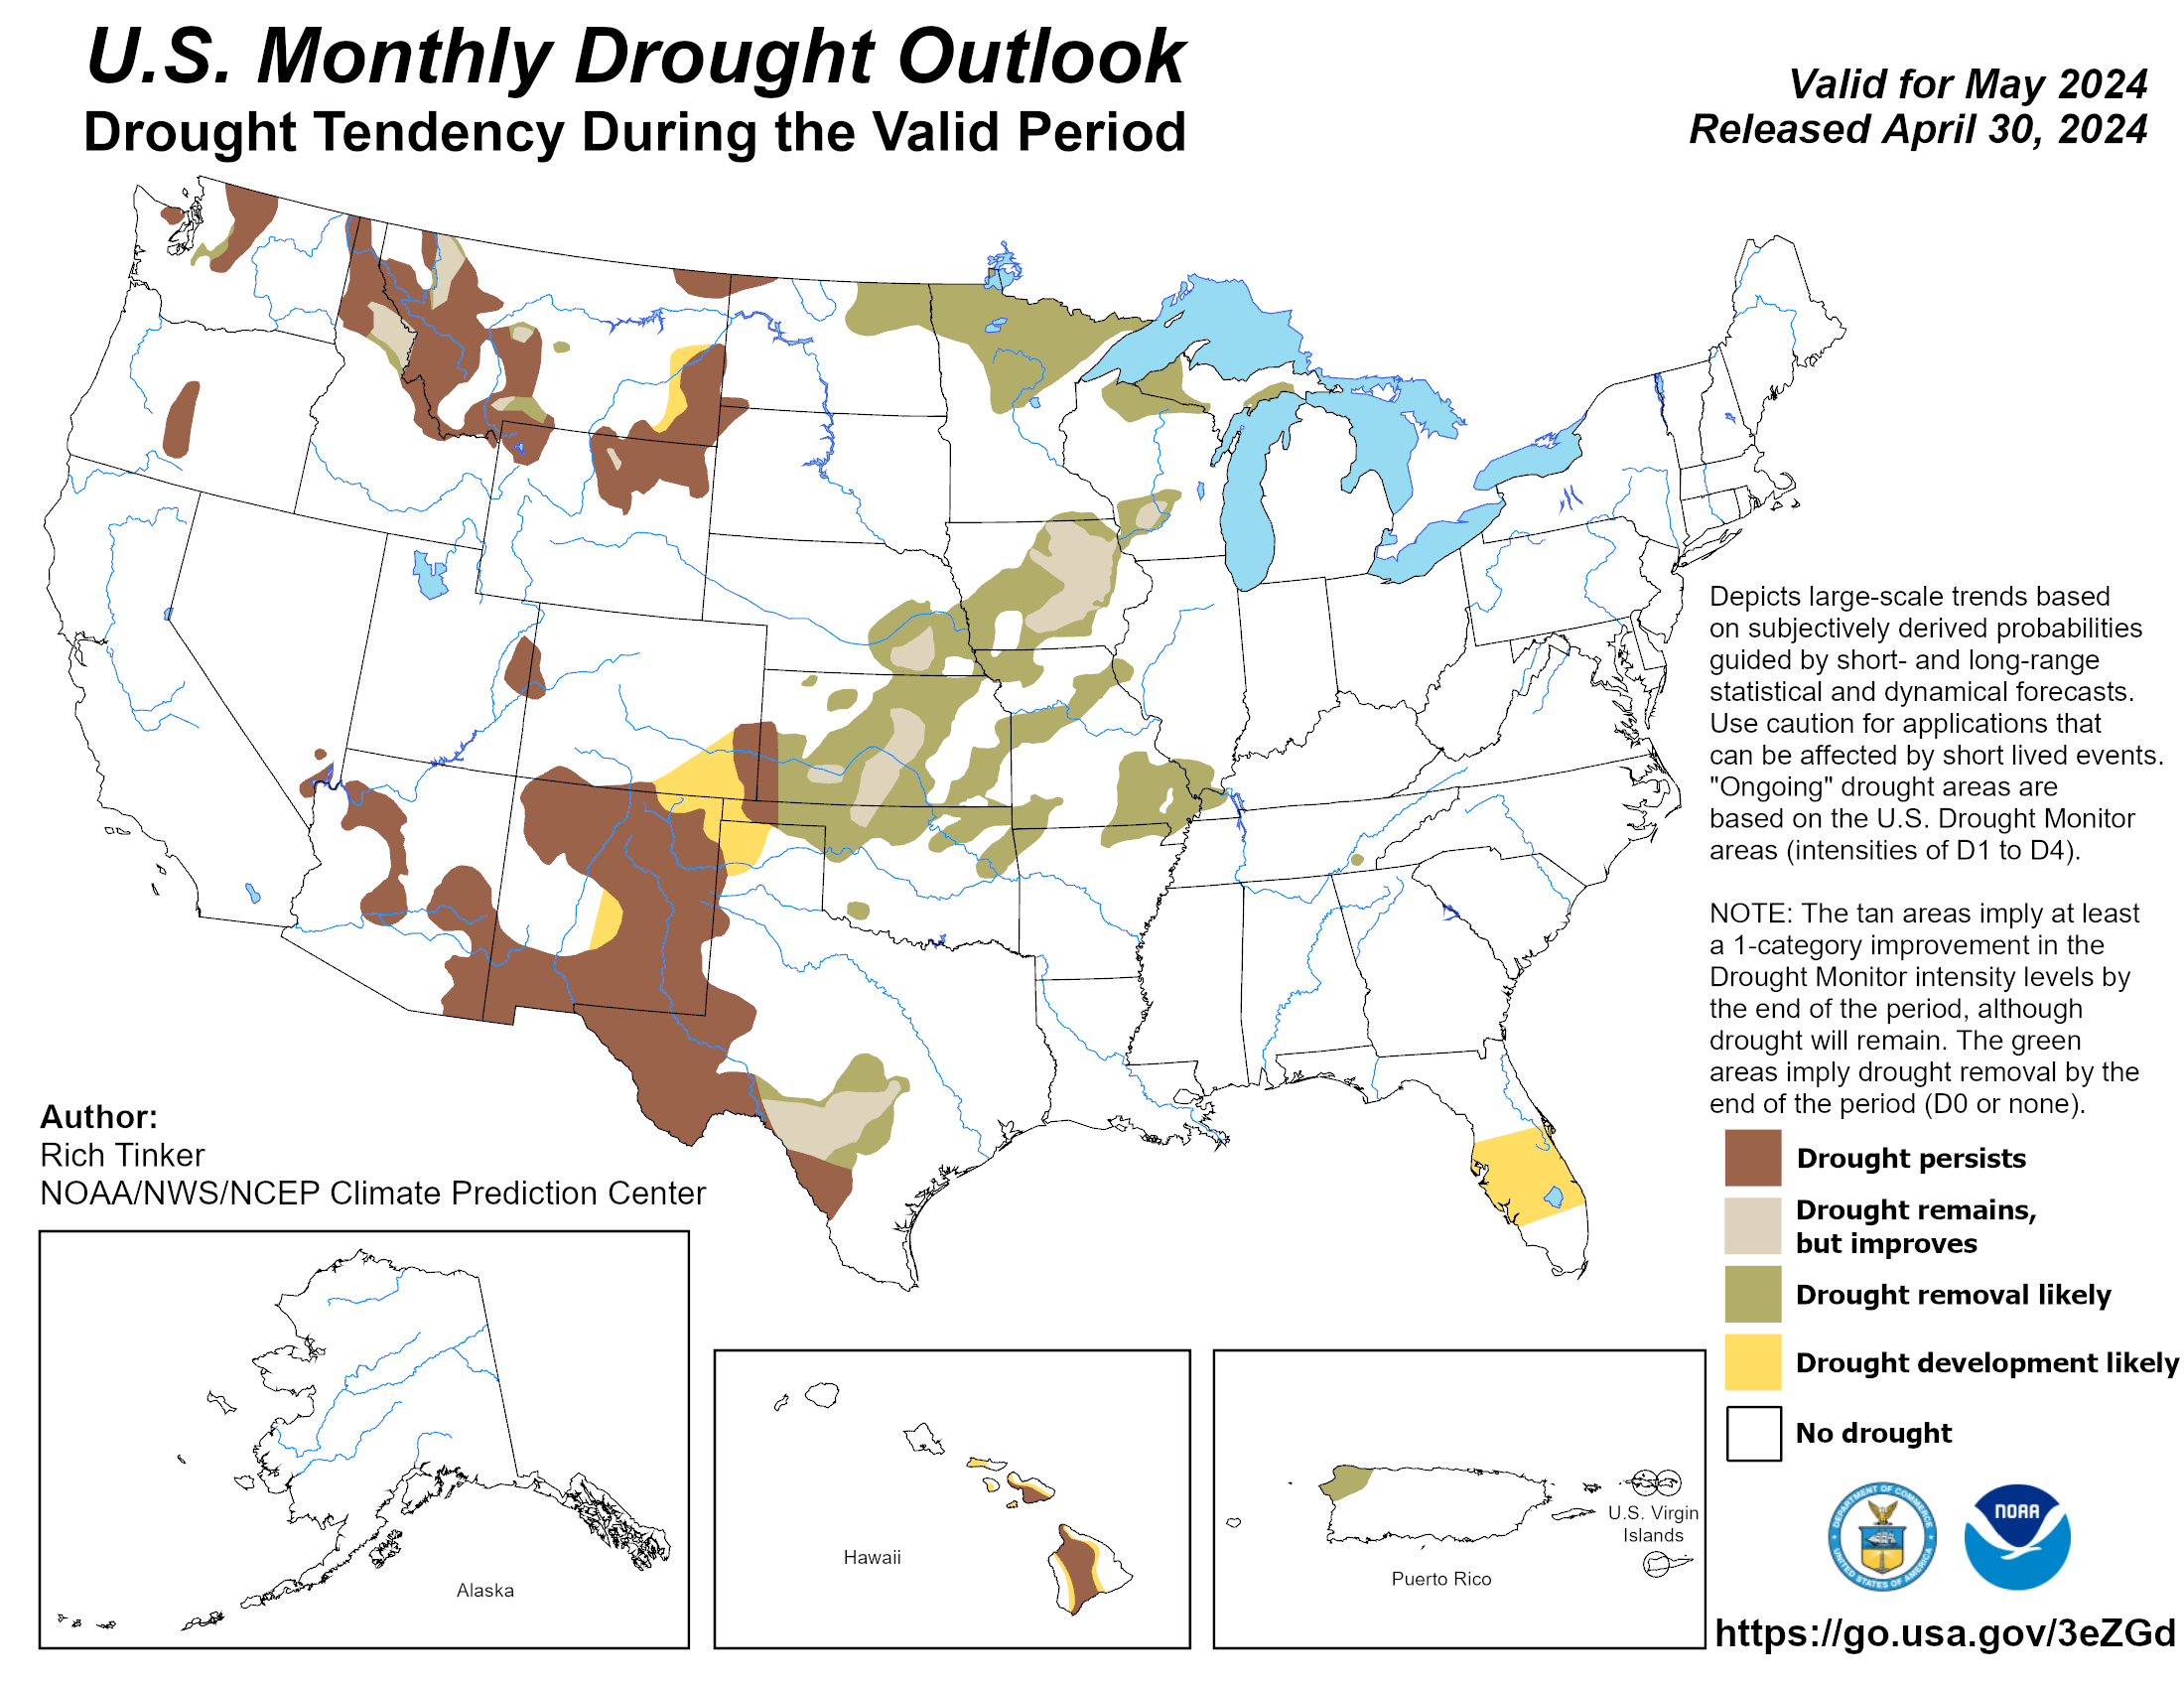 United States Monthly Drought Outlook Graphic - click on image to enlarge